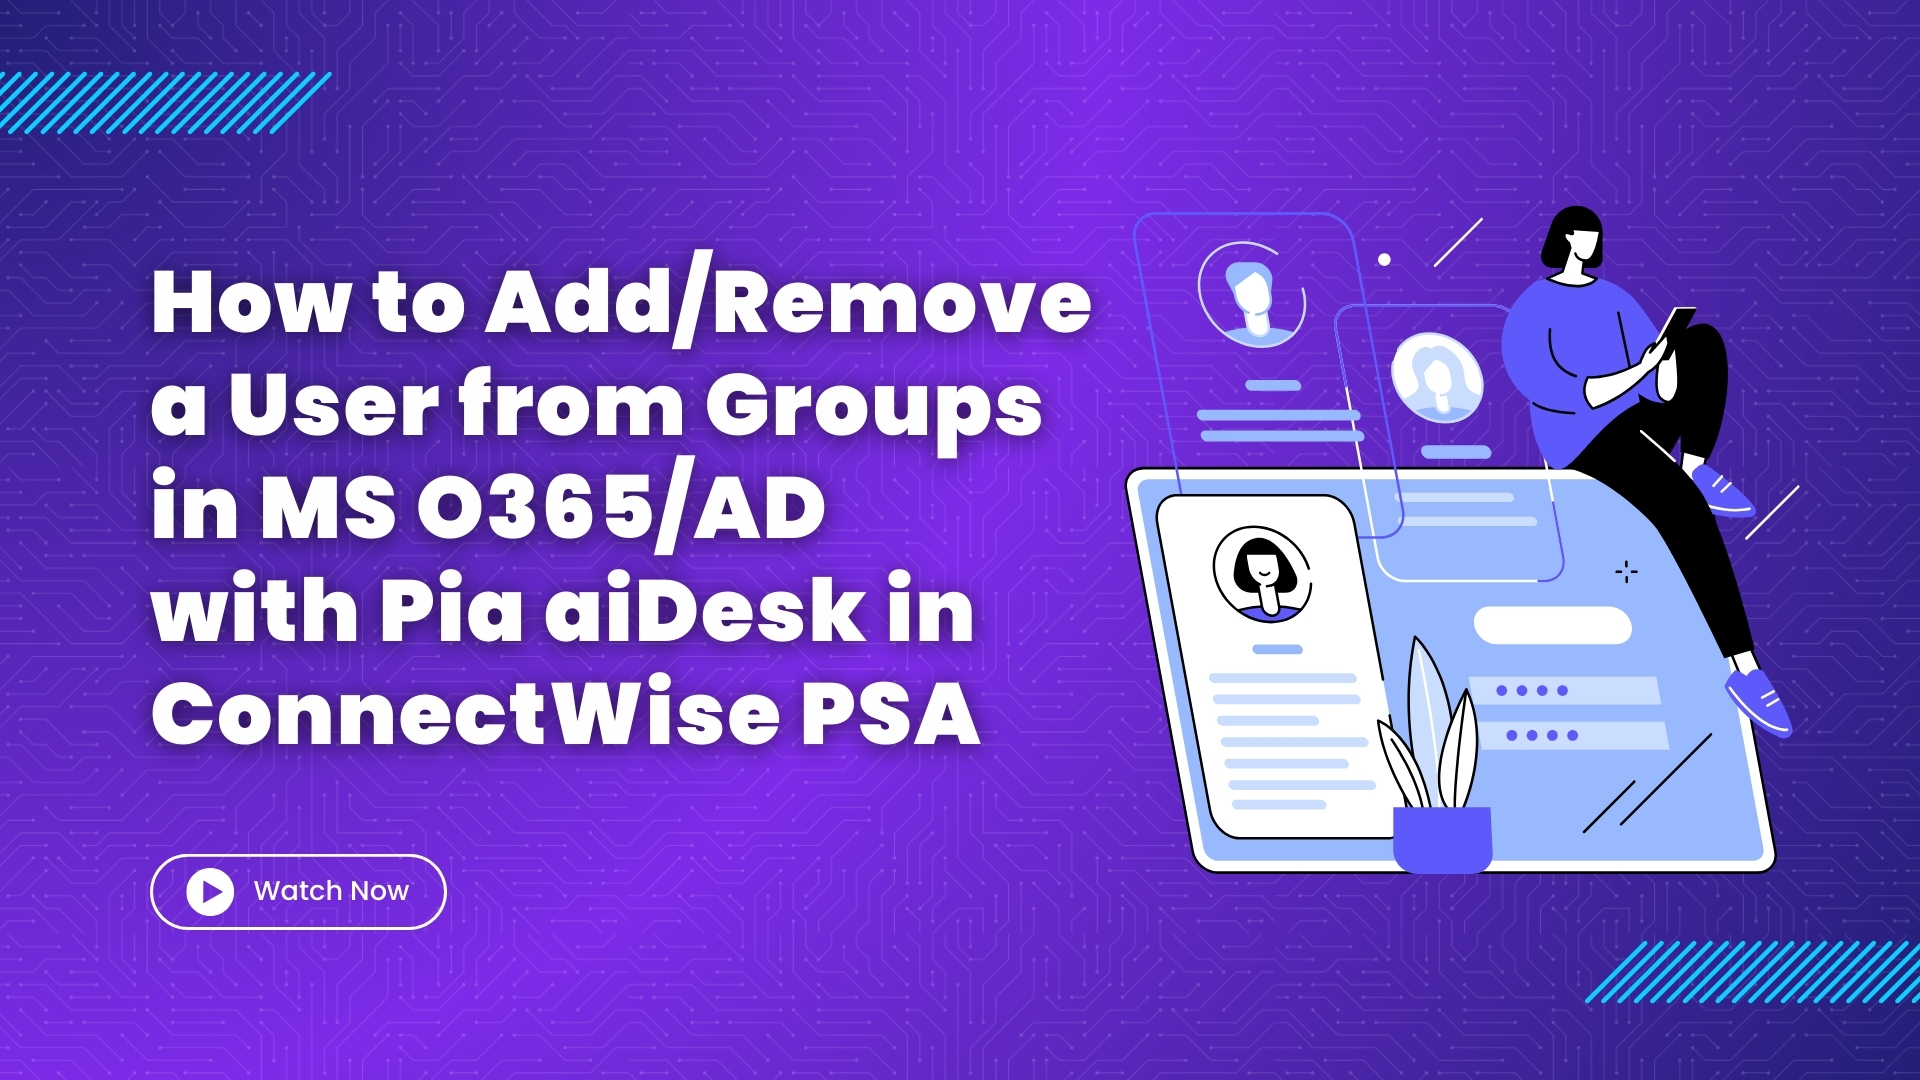 How to Add/Remove a User from Groups in MS O365/AD with Pia aiDesk in ConnectWise